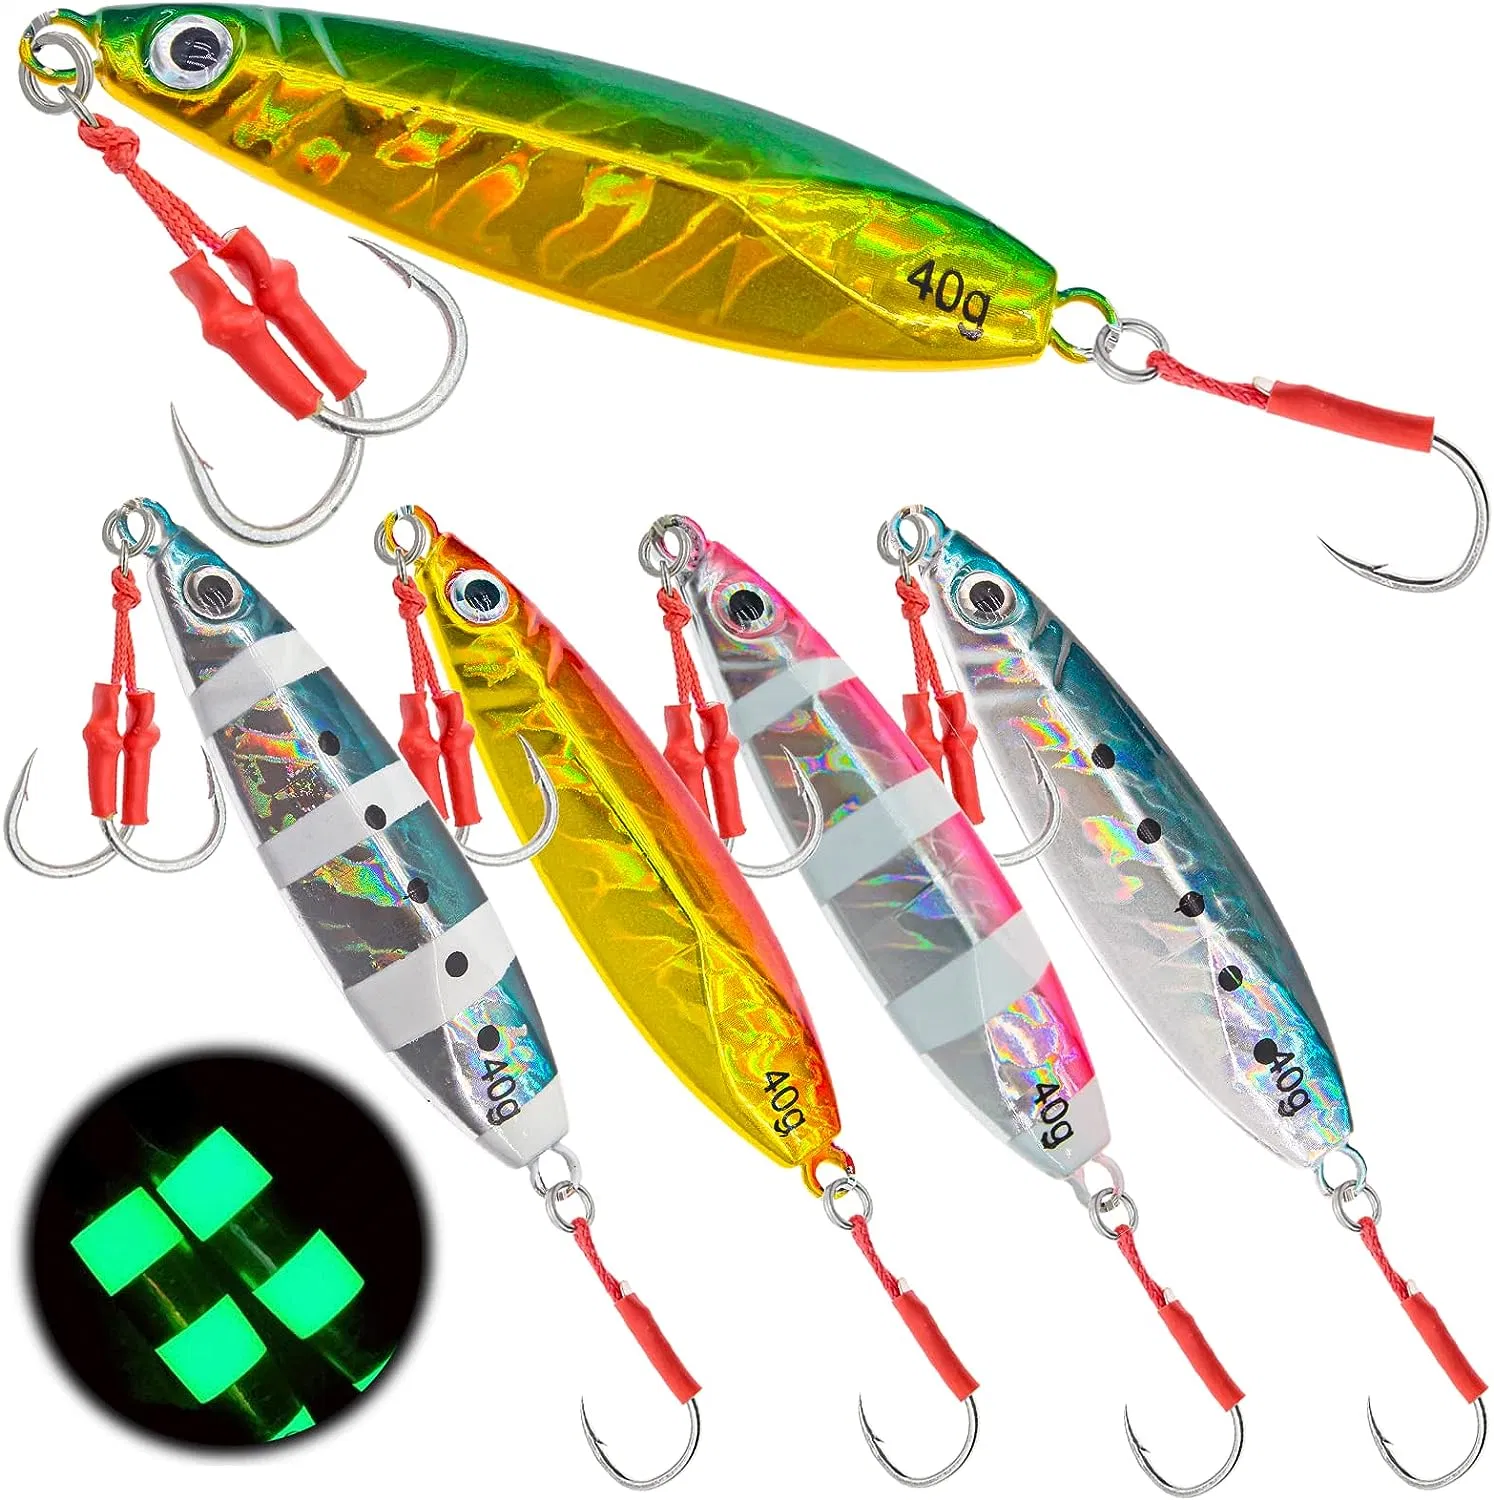 Jigging Spoons for Vertical Fishing